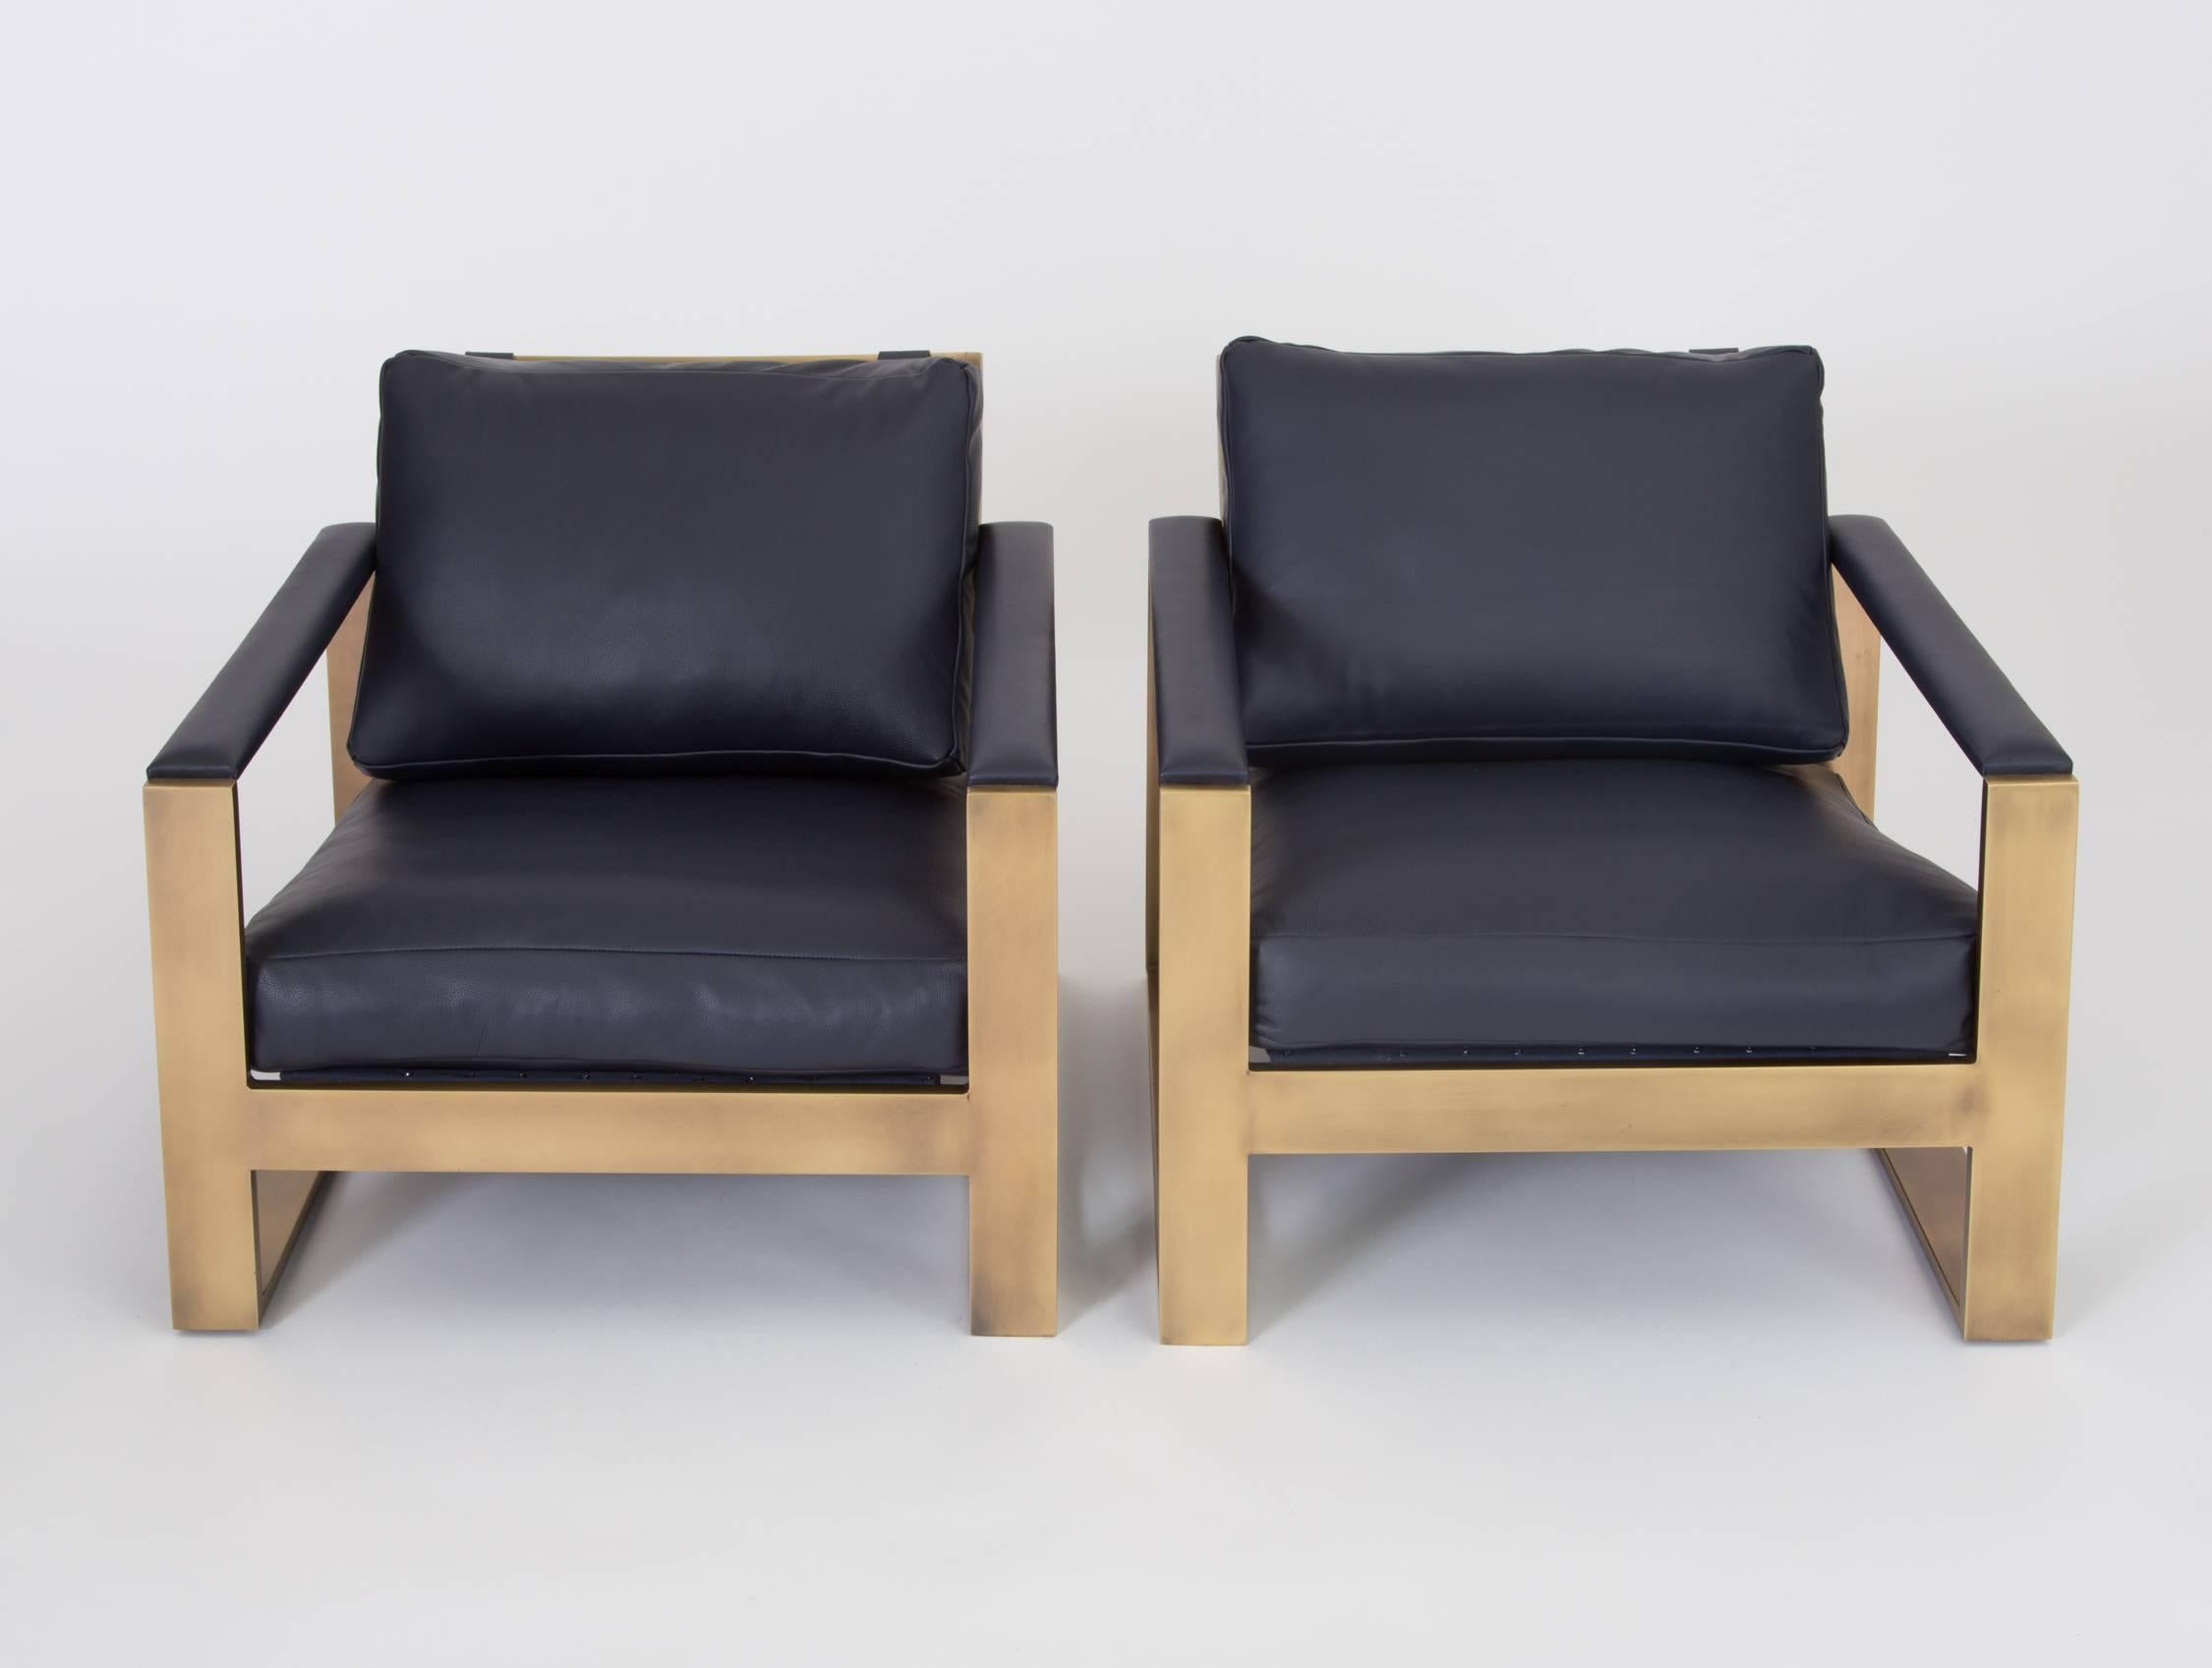 American Pair of Bronze Frame Lounge Chairs by Milo Baughman